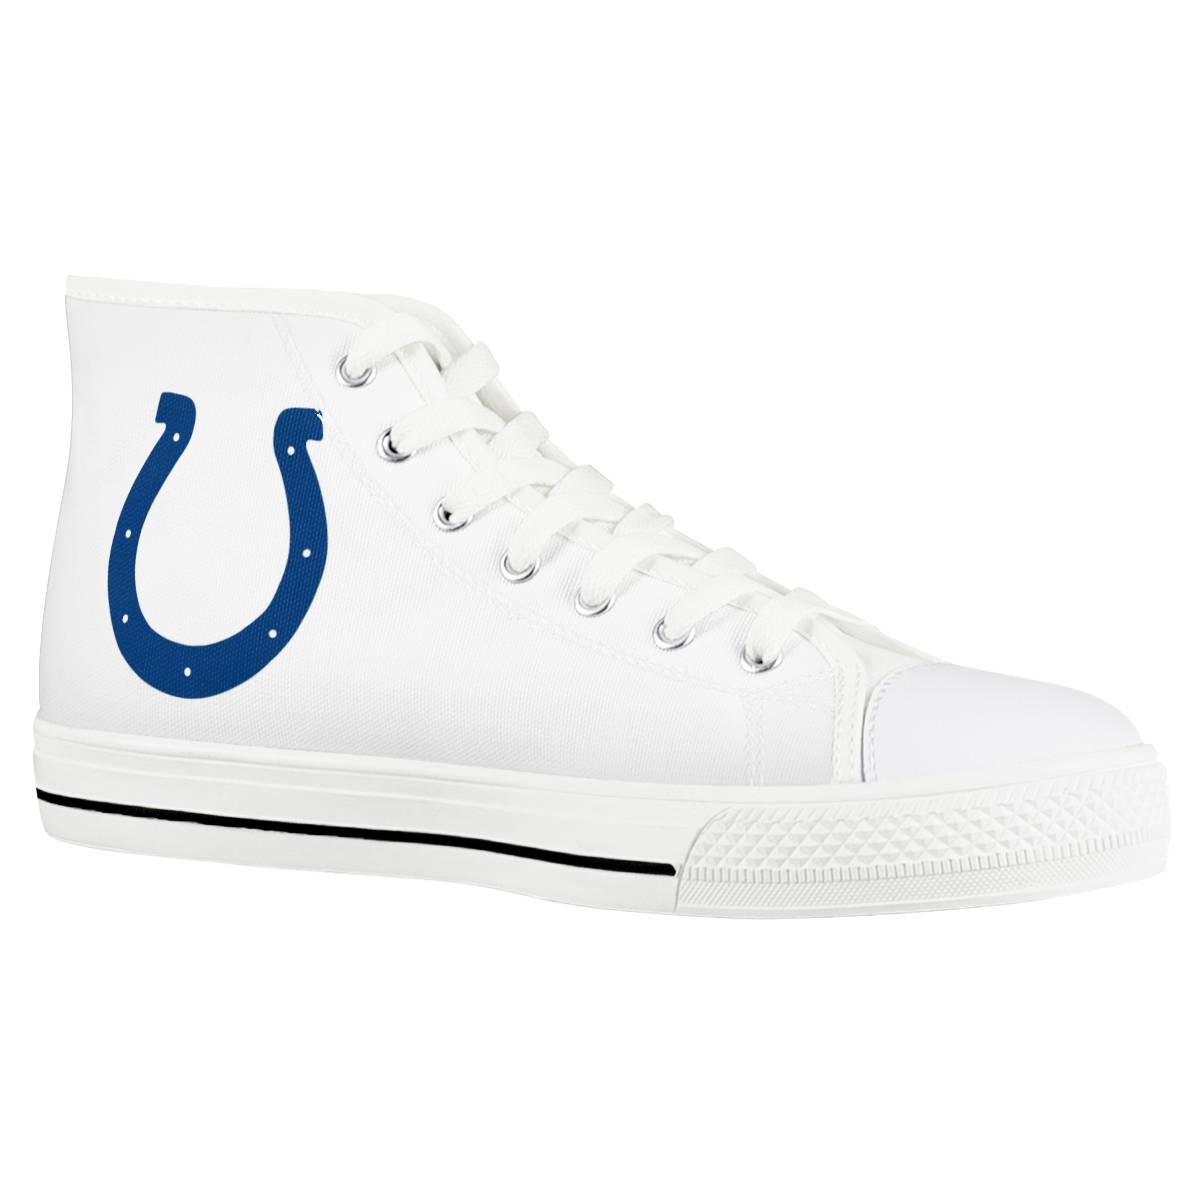 Women's Indianapolis Colts High Top Canvas Sneakers 001